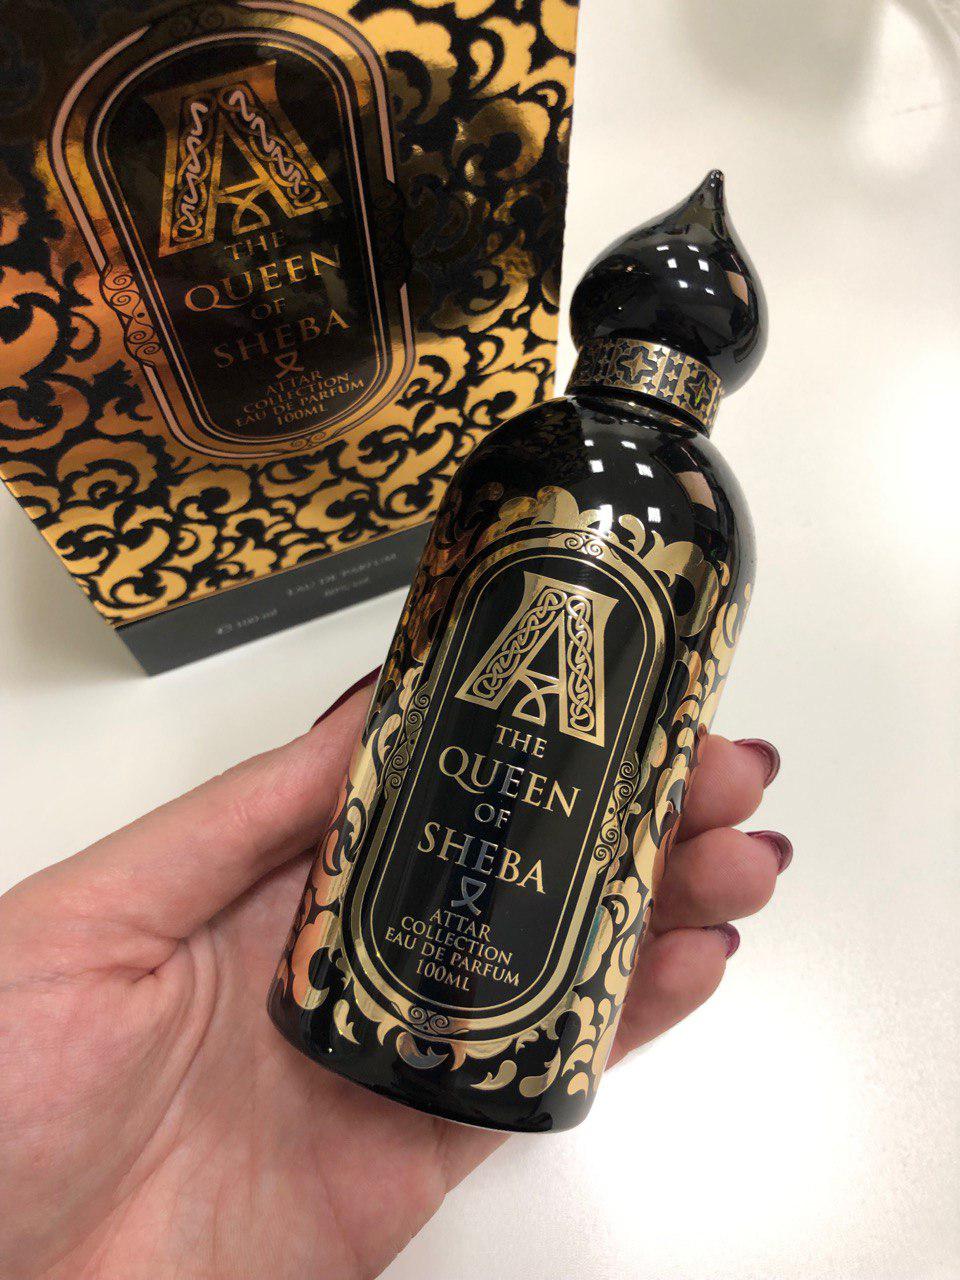 Attar collection the queen of sheba. Духи Квин Шеба. Аттар Королева Шеба. Attar collection the Queen of Sheba, 100 ml. Аттар Queen.